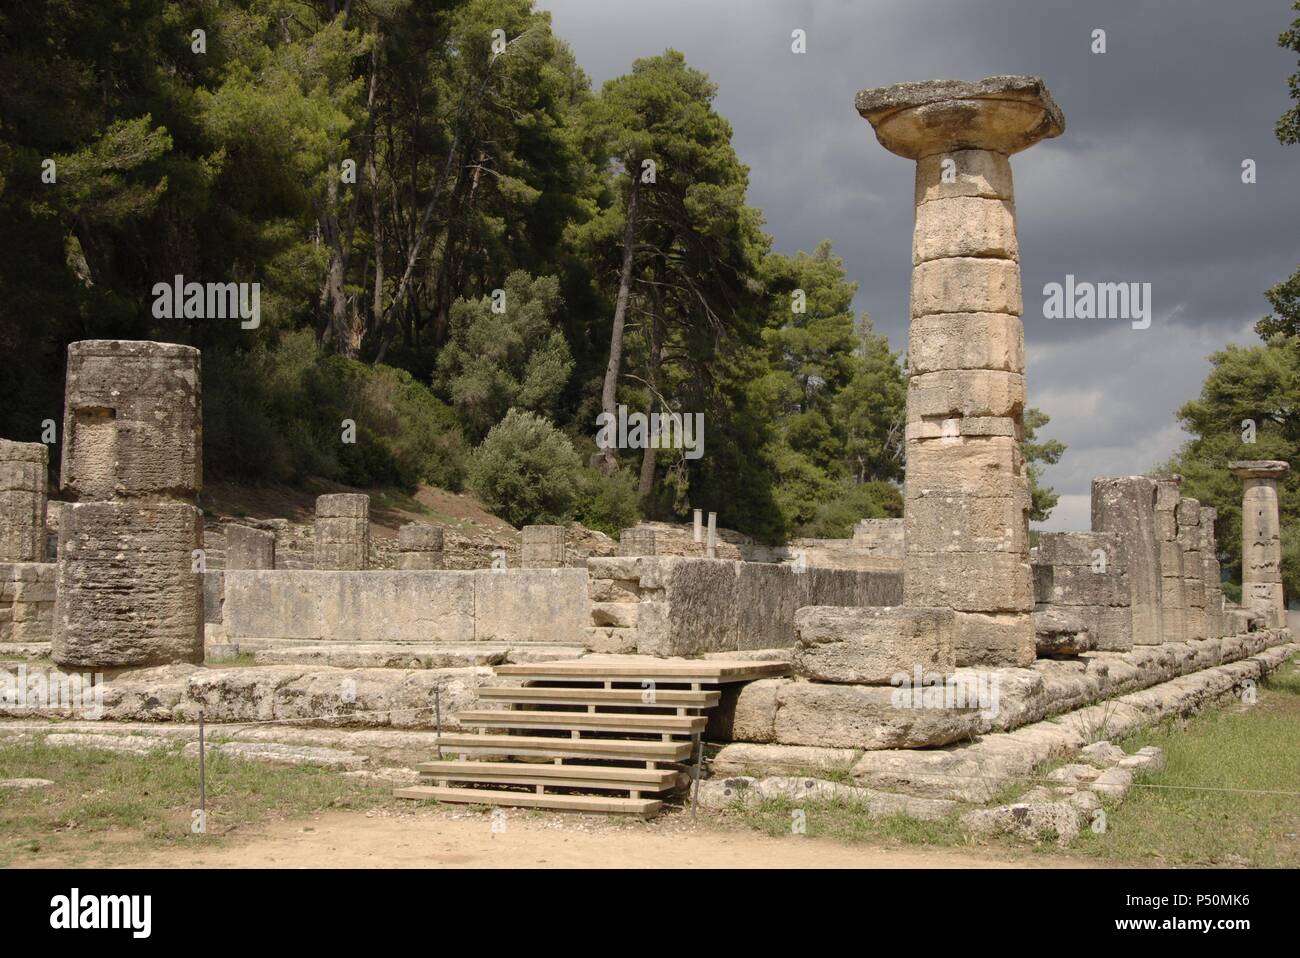 Temple of Hera (Heraion). Doric style. Peripteral and hexastyle. 6th century B.C. General view. Altis. Sanctuary of Olympia. Ilia Province. Peloponnese region. Greece. Stock Photo